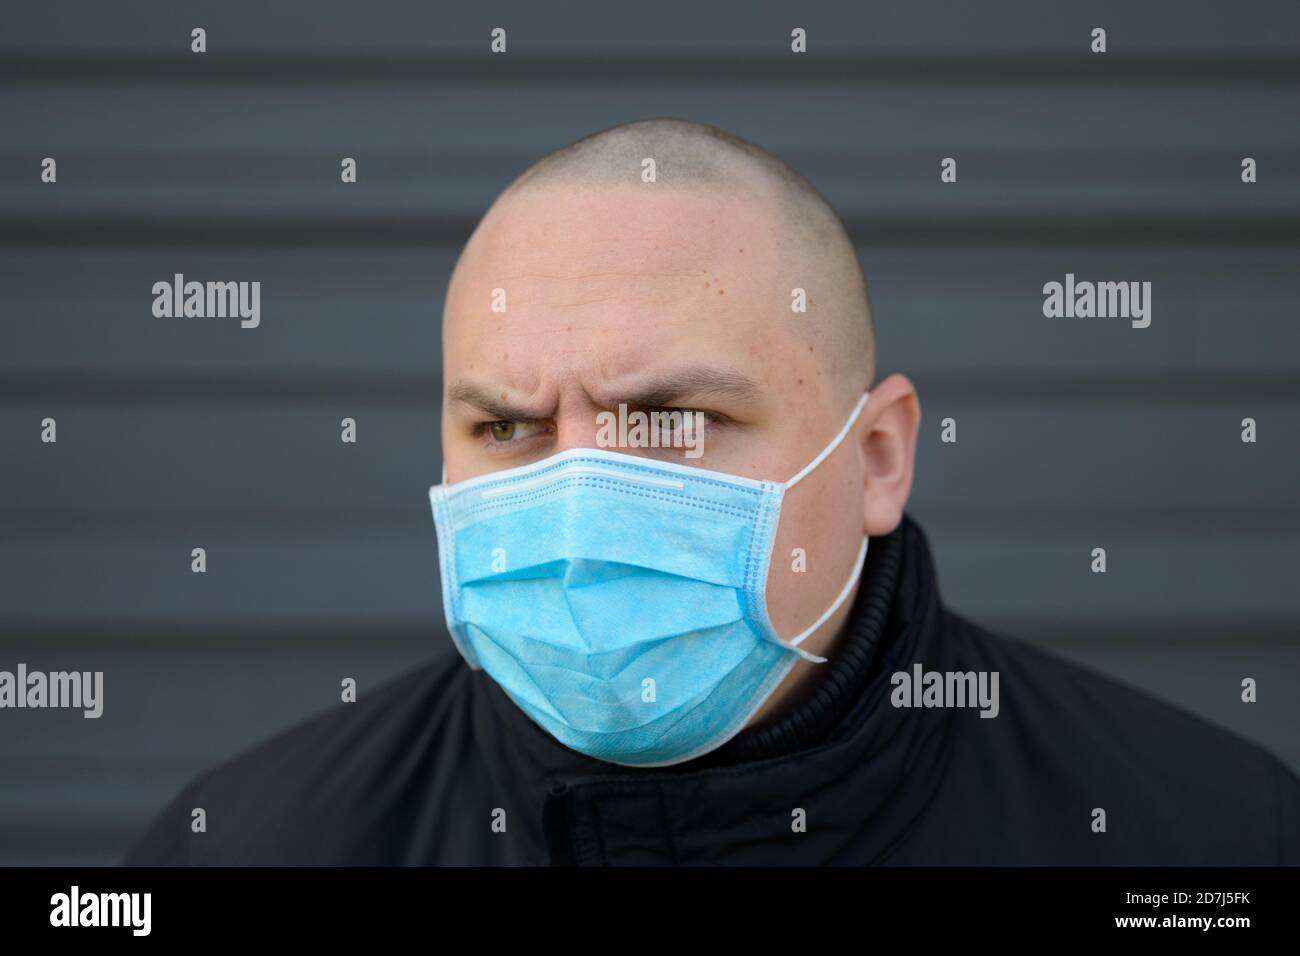 Angry young man wearing a surgical face mask frowning as he looks away with a determined expression during the Covid-19 pandemic against a grey exteri Stock Photo